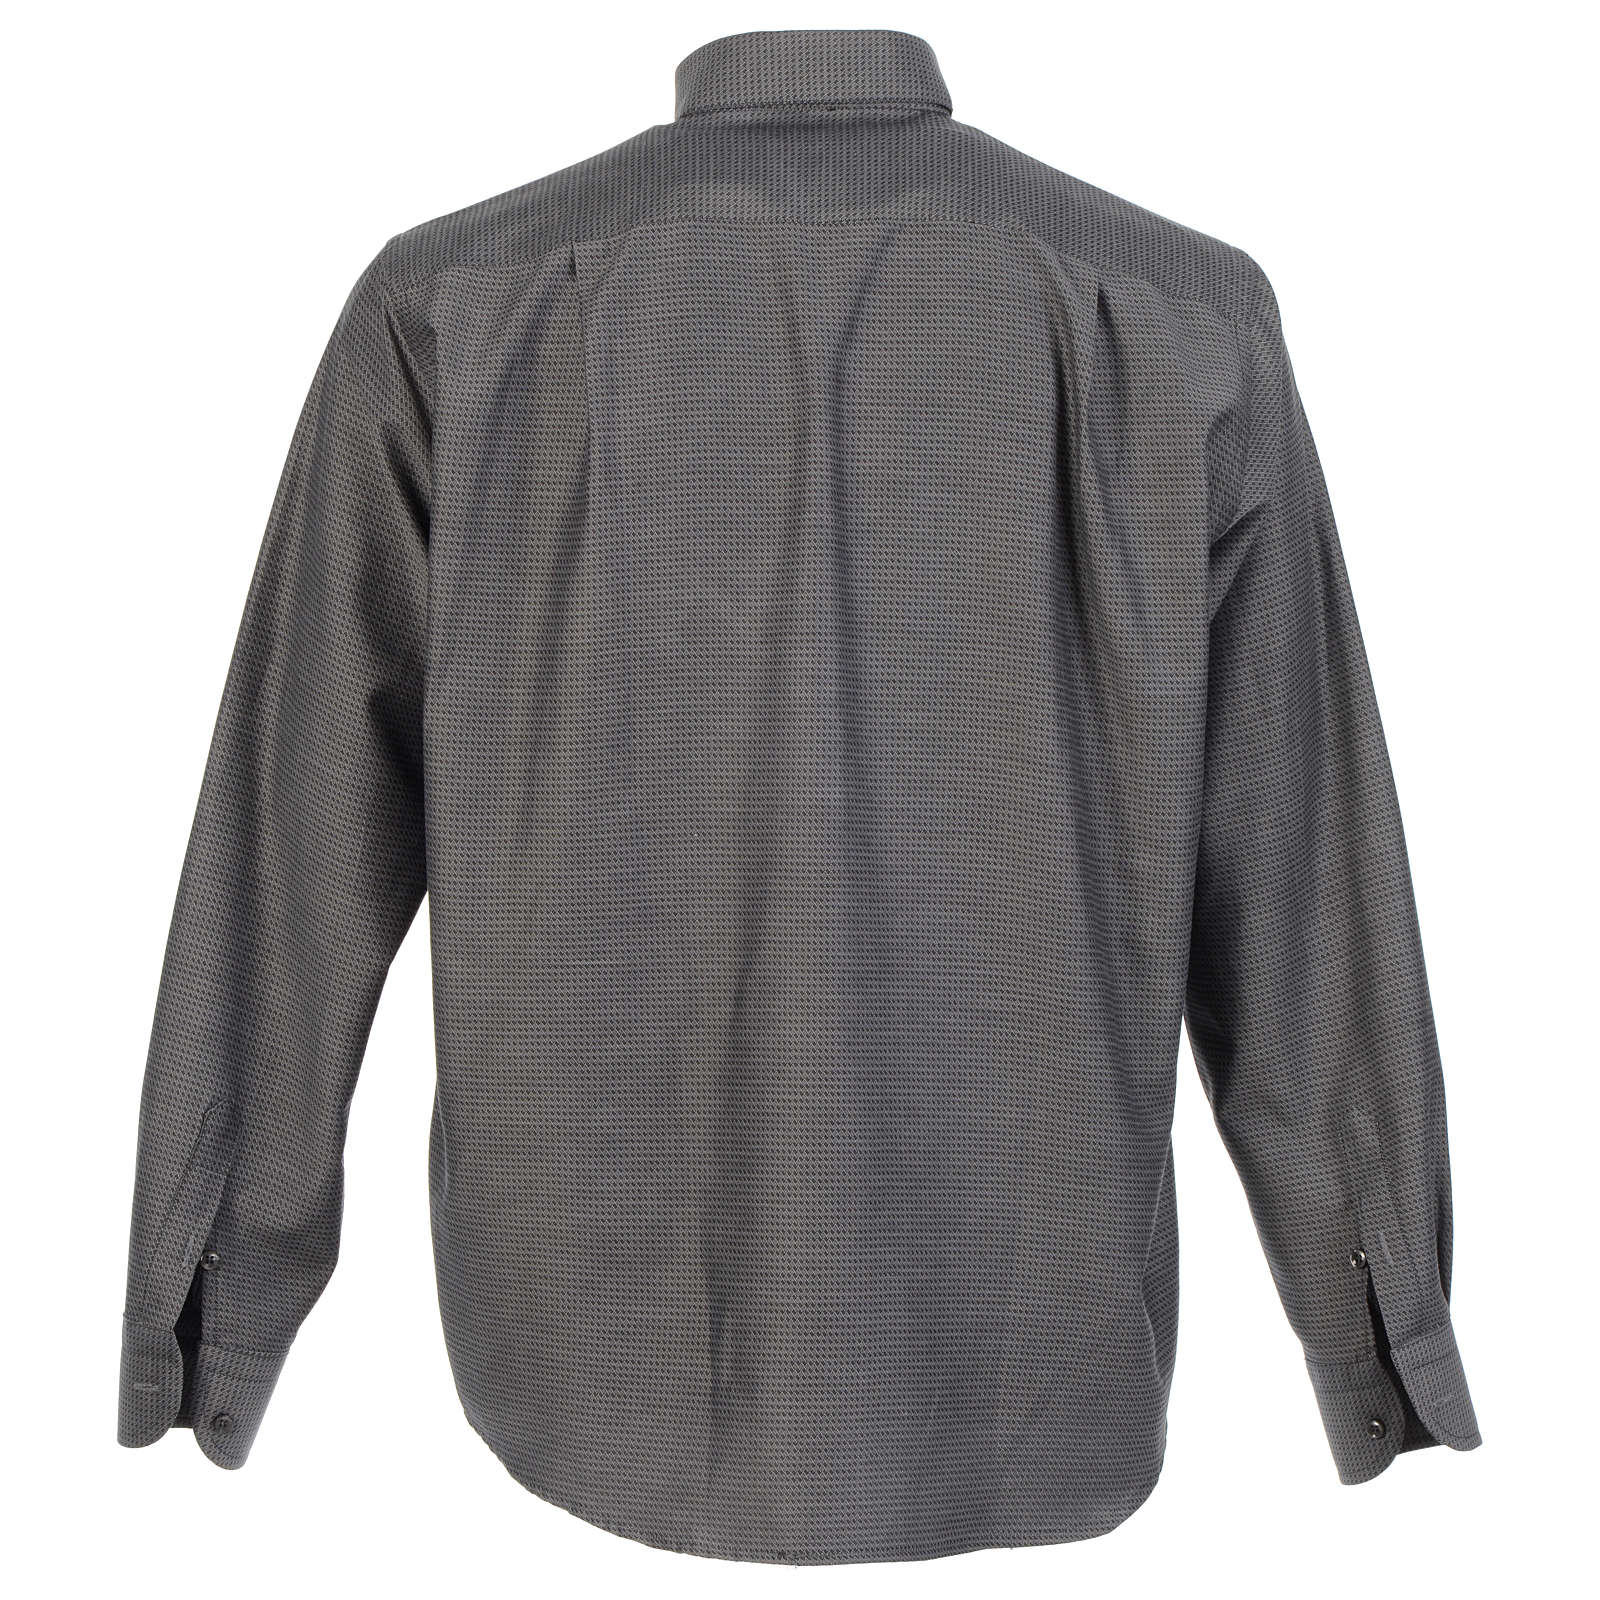 Clerical shirt and collar, grey jacquard, long sleeve | online sales on ...